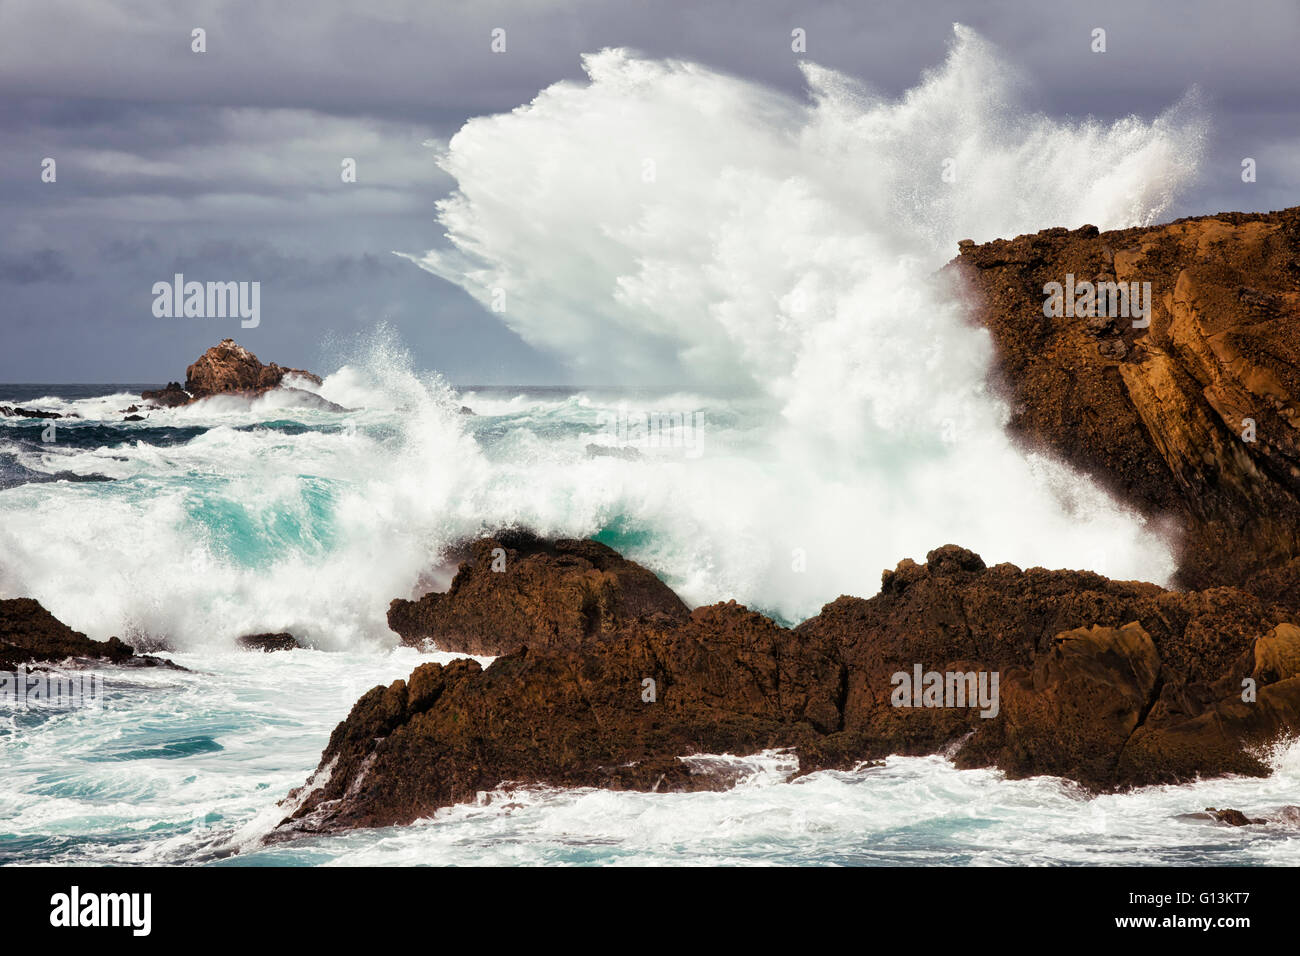 Massive waves explode against the cliffs at Point Lobos State Natural Reserve on California’s Big Sur coastline. Stock Photo